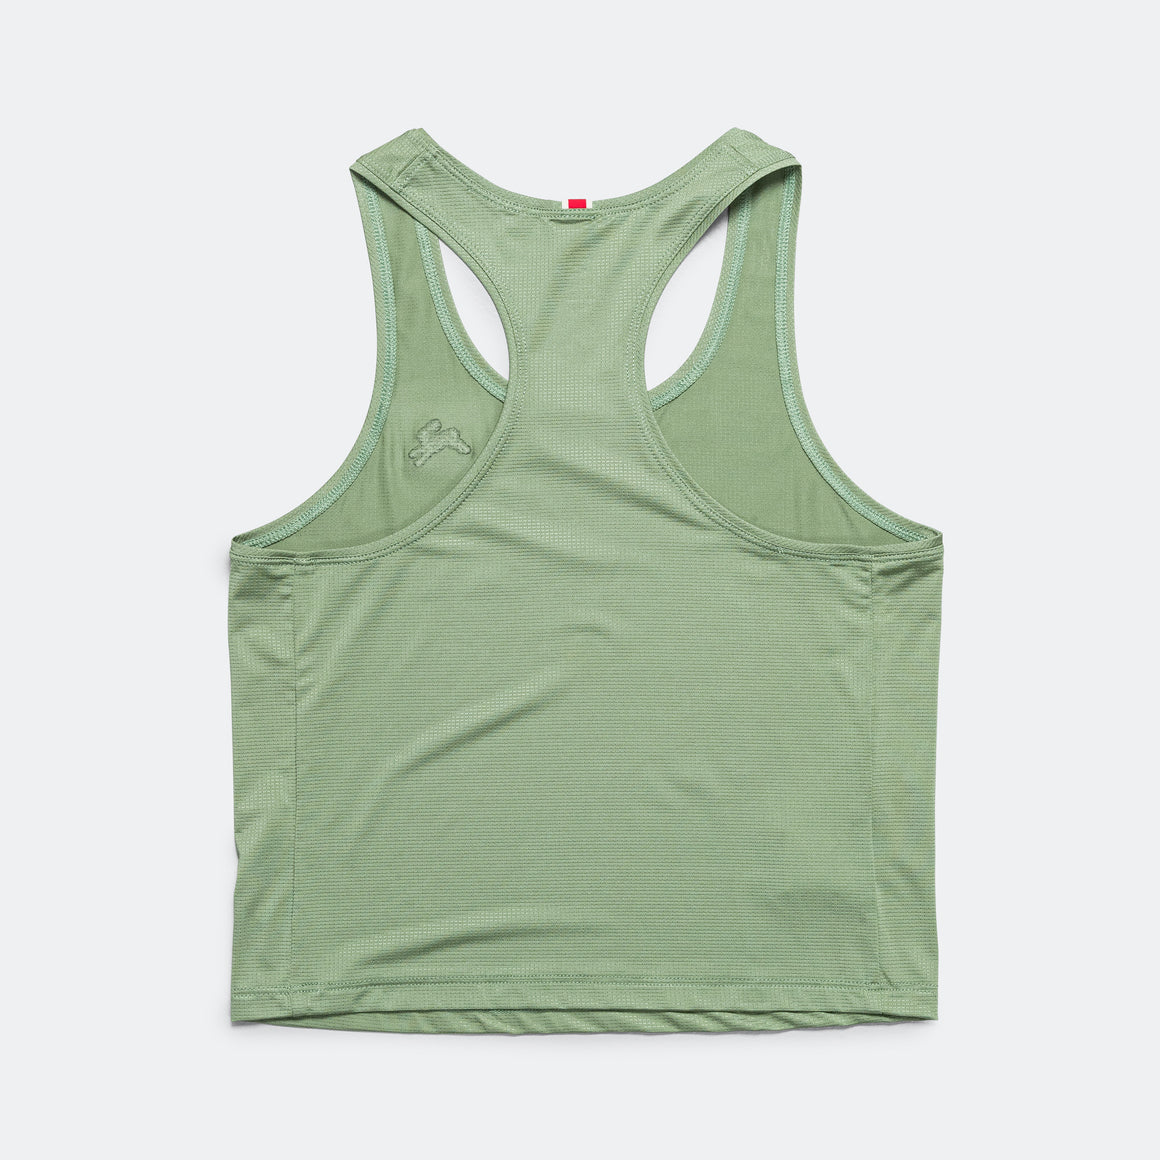 Tracksmith - Womens Twilight Crop Tank - Loden - Up There Athletics